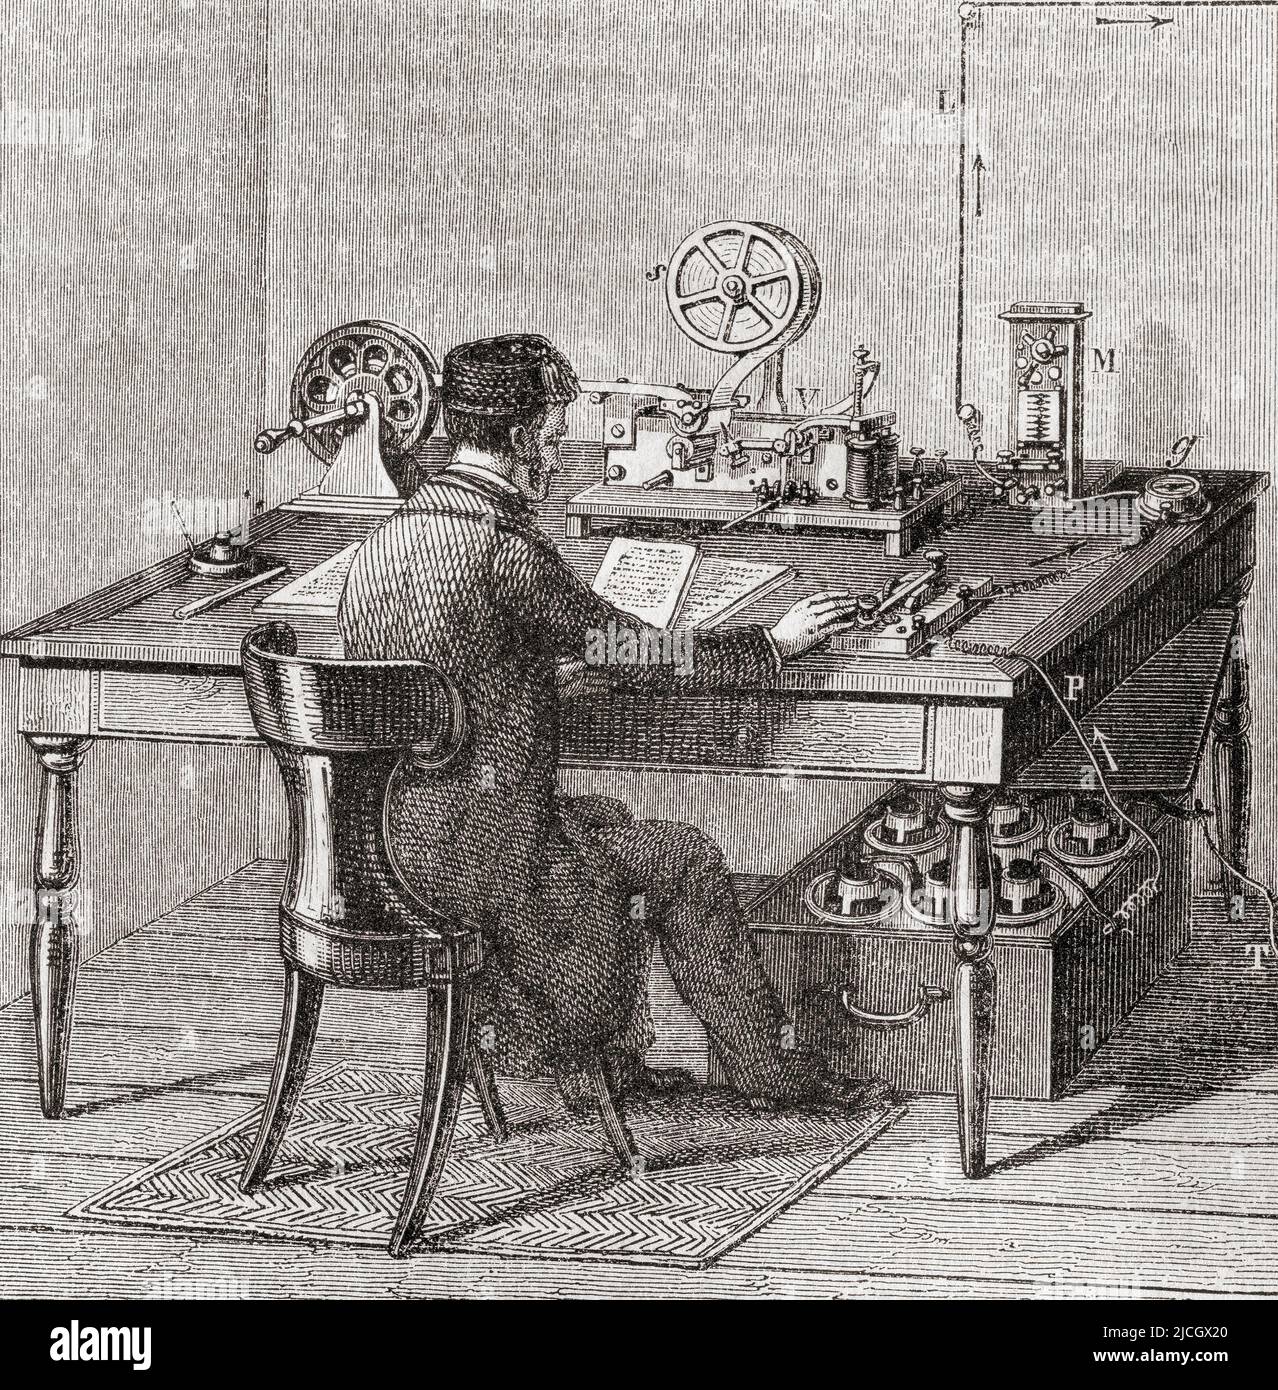 Telegraph office worker forwarding a message in Morse Code, 19th century.  From L'Univers Illustre, published Paris, 1859 Stock Photo